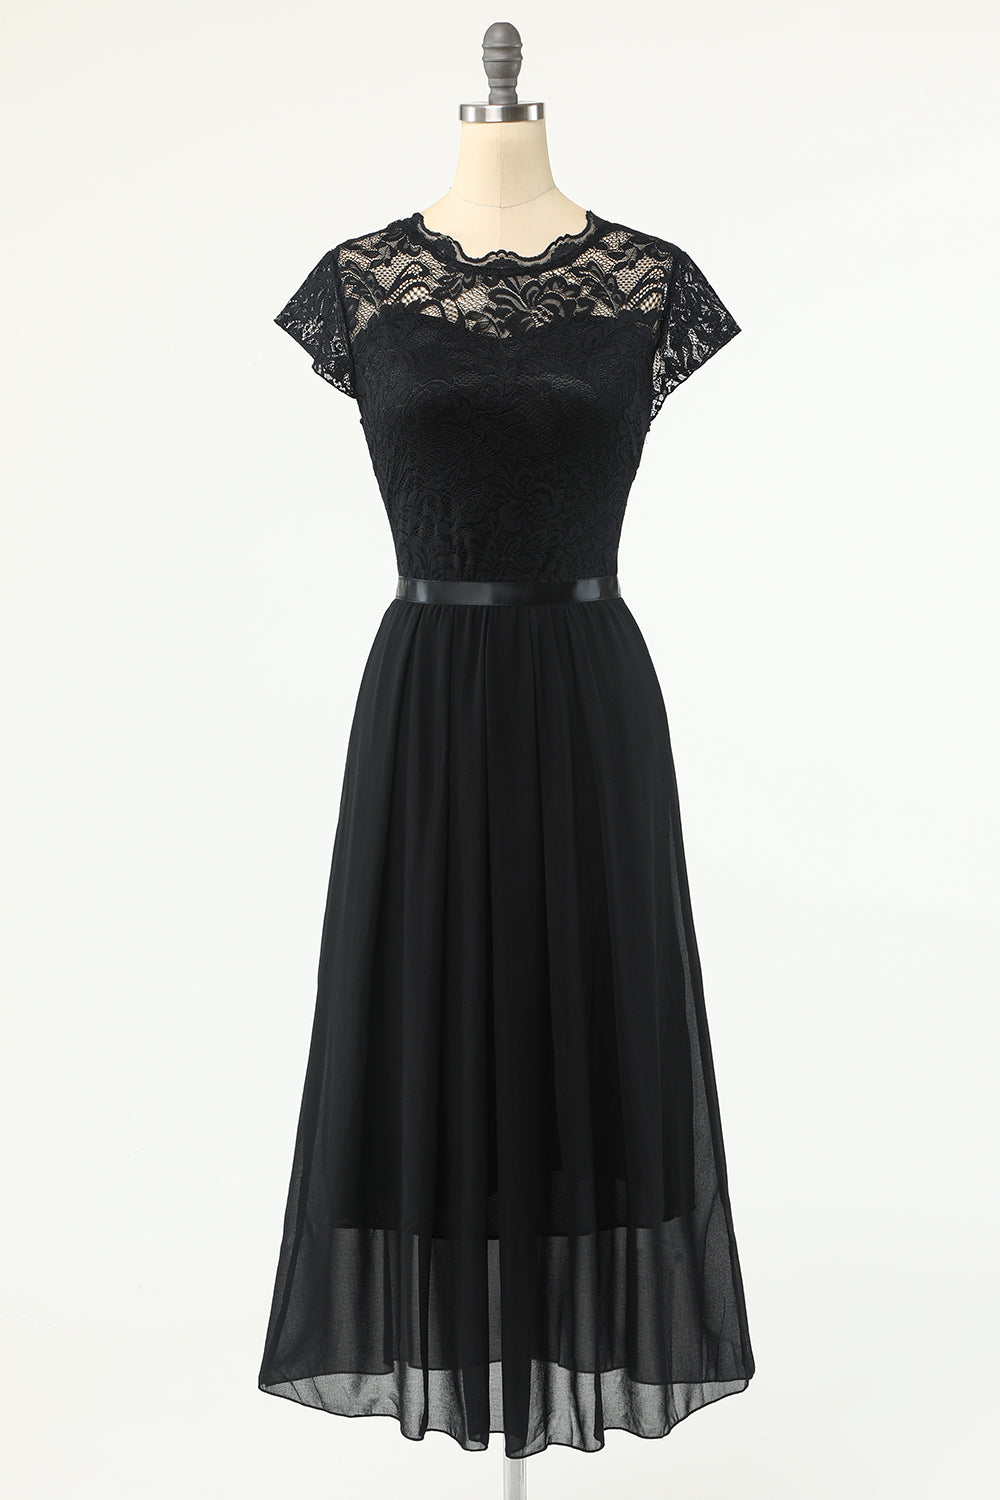 Prom Dresses With Sleeve, Classic A Line Black Party Dress with Lace